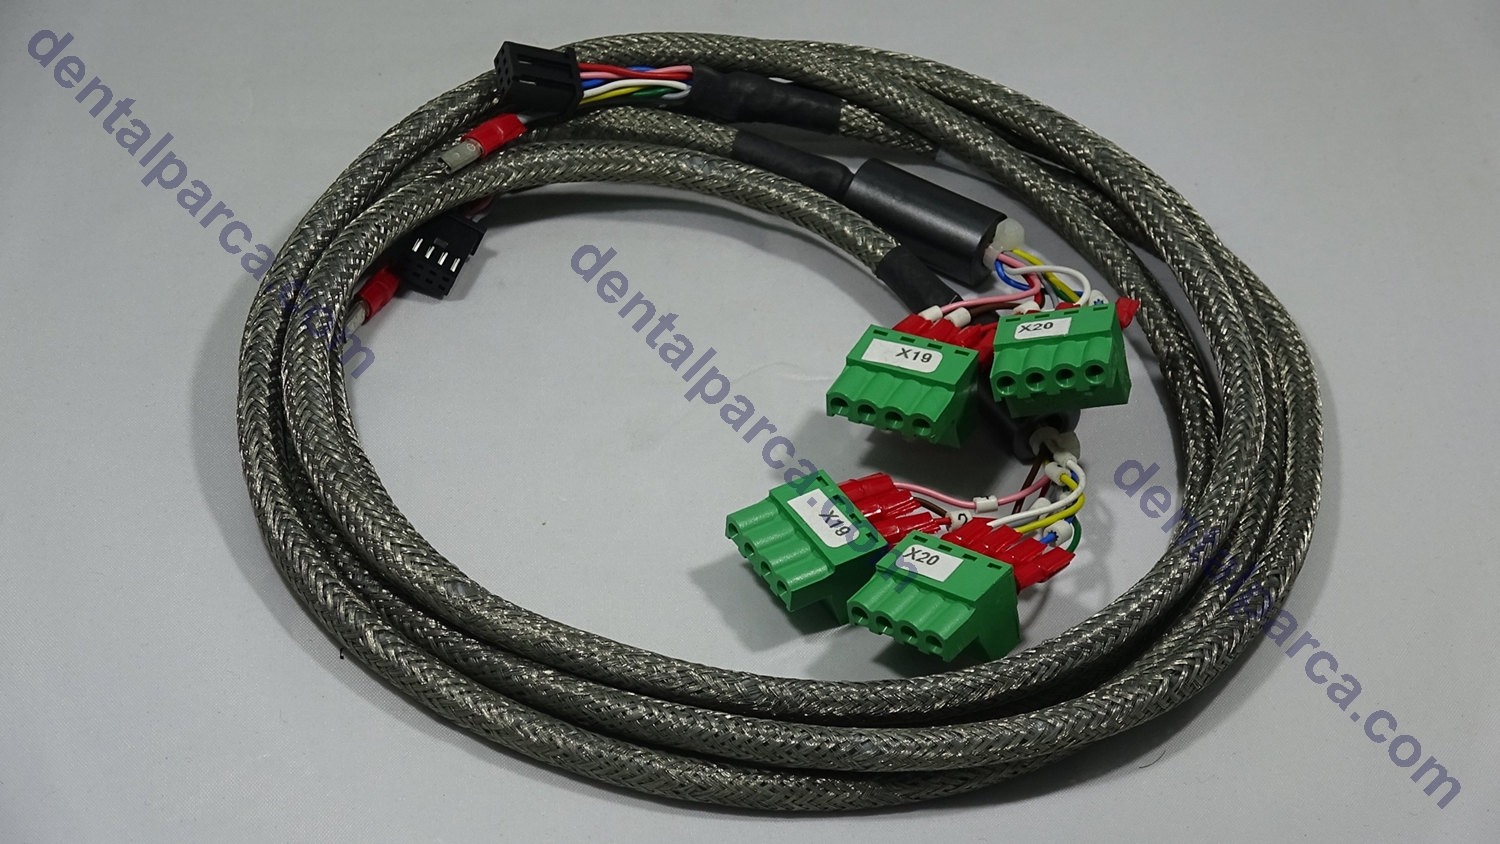 CABLE X18/X40 (CASSETTE
MOVEMENT
MOTOR SUPPLY) resmi